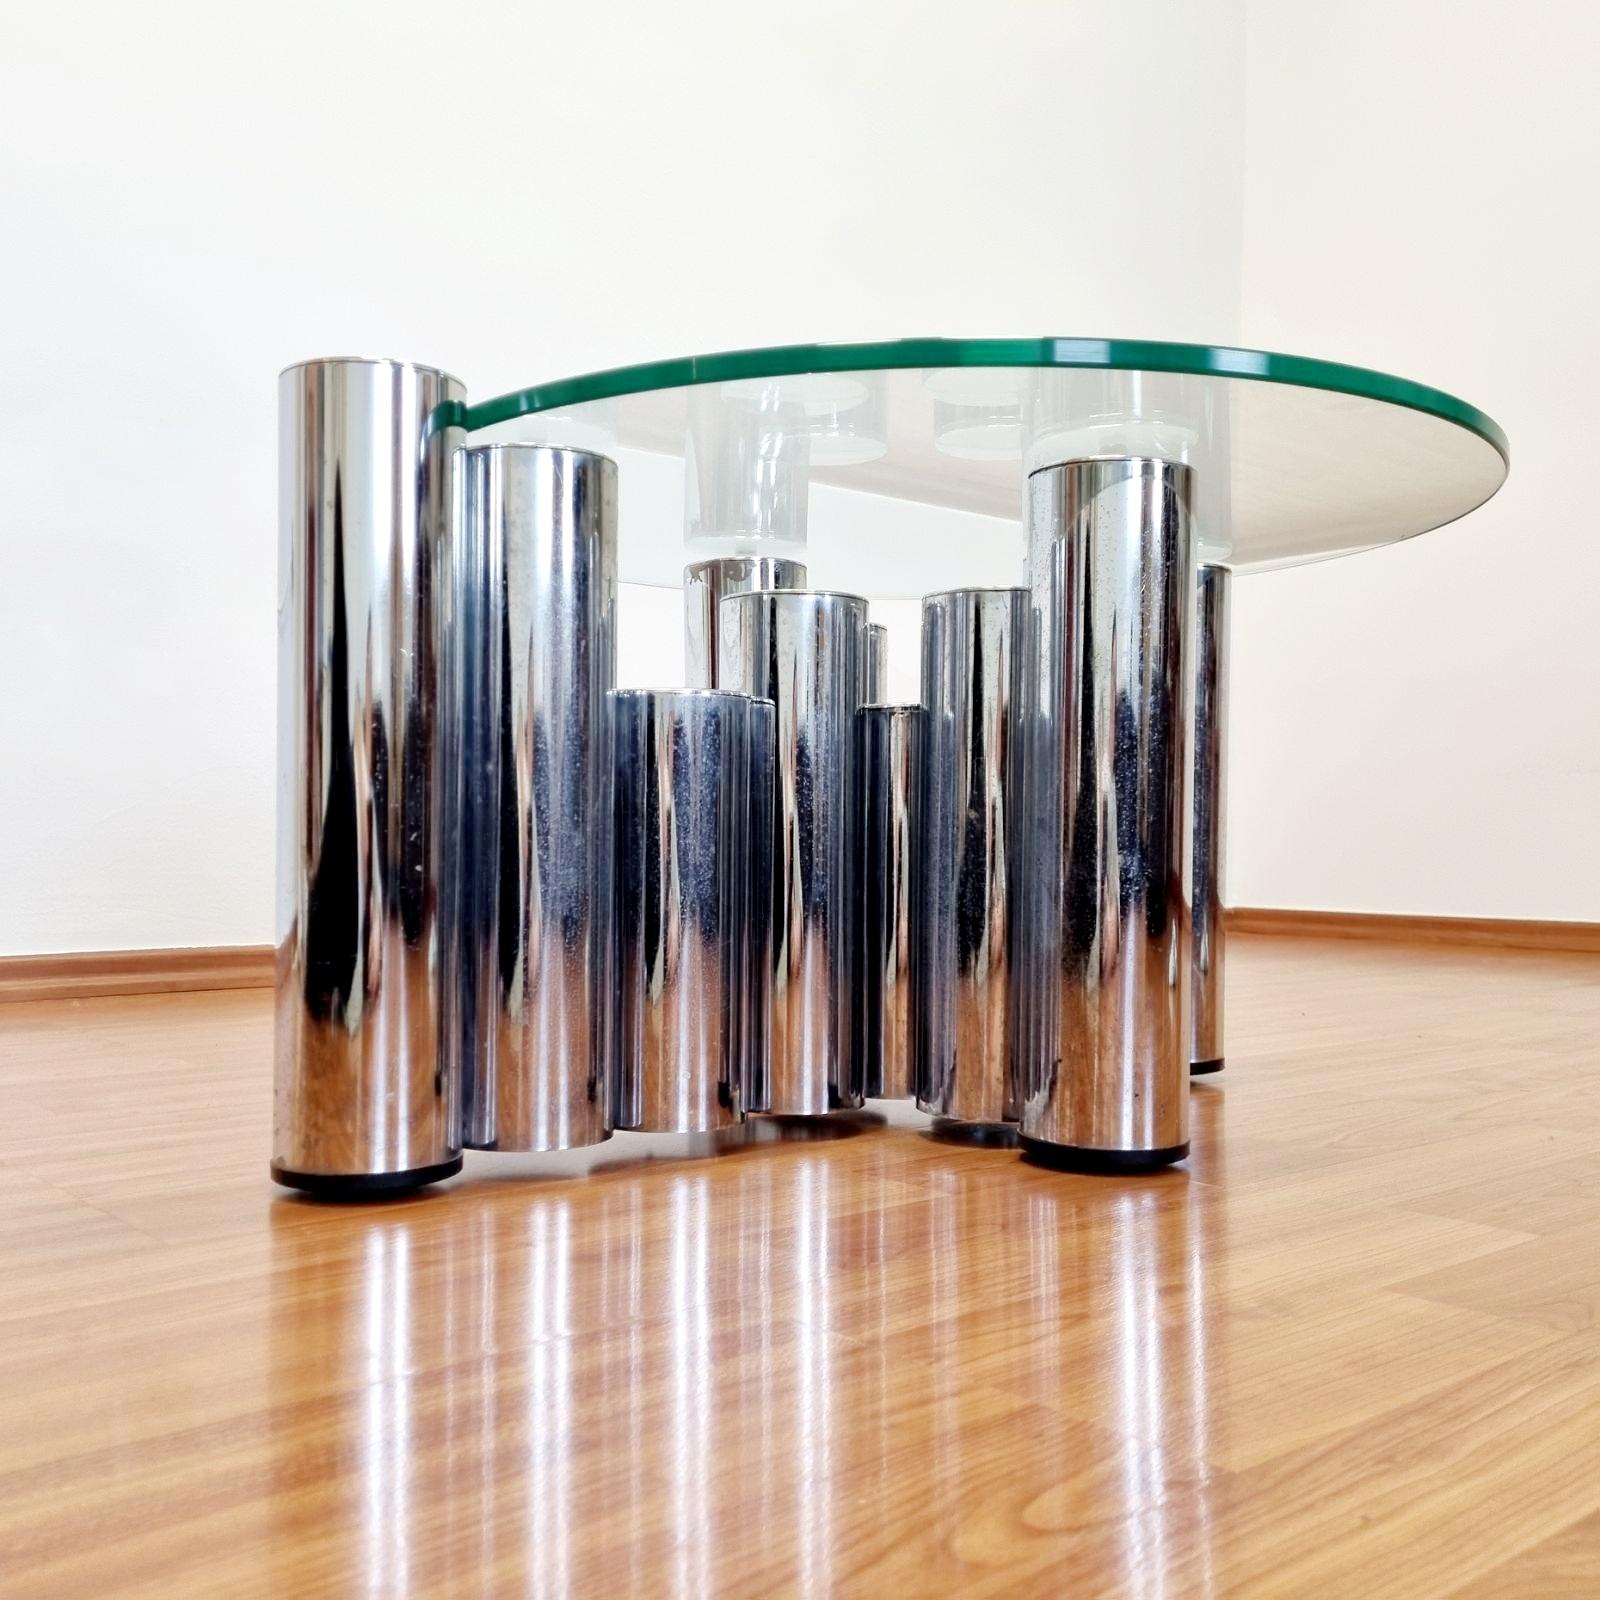 Marco Zanuso attributed vintage sculpture coffee table. Made in Italy in the 70s.
Tubular chromed base with round glass tabletop.
Very rare piece of design
Dimensions:
Base: 64x41 cm, height 35 cm
Tabletop: diameter: 60cm, height: 1 cm.